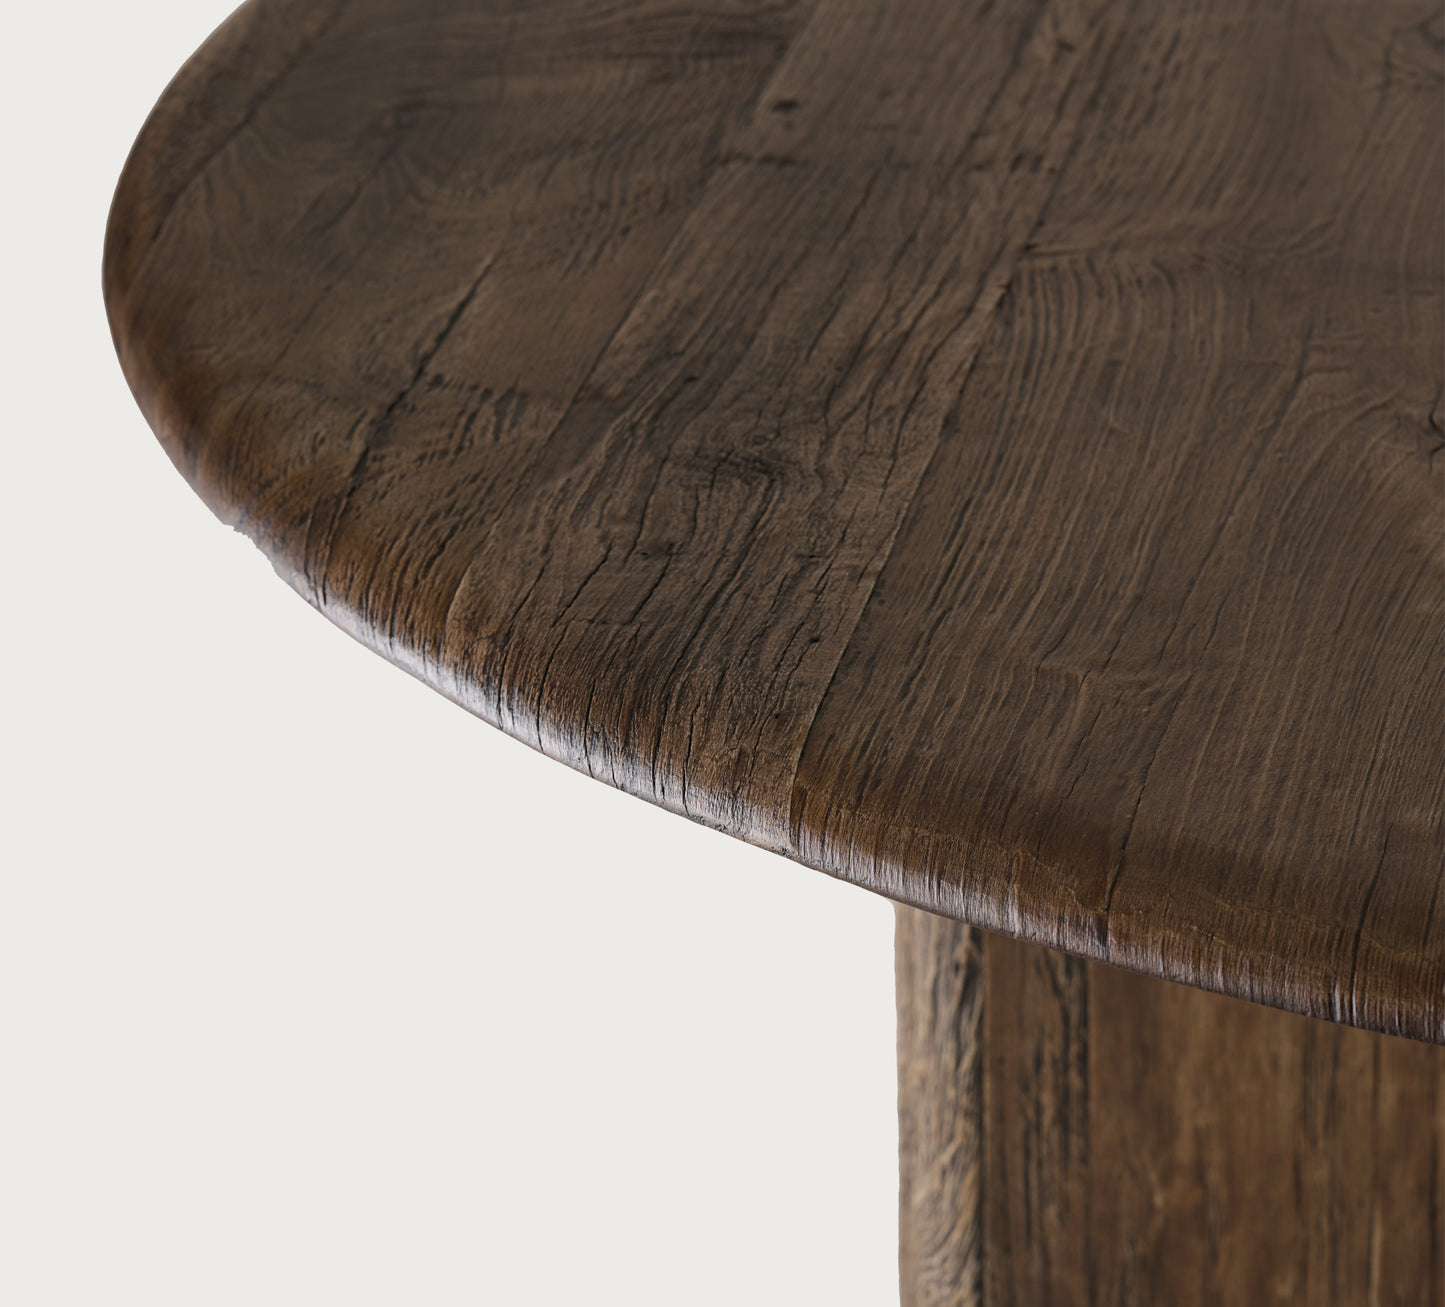 Sefa Round Dining Table